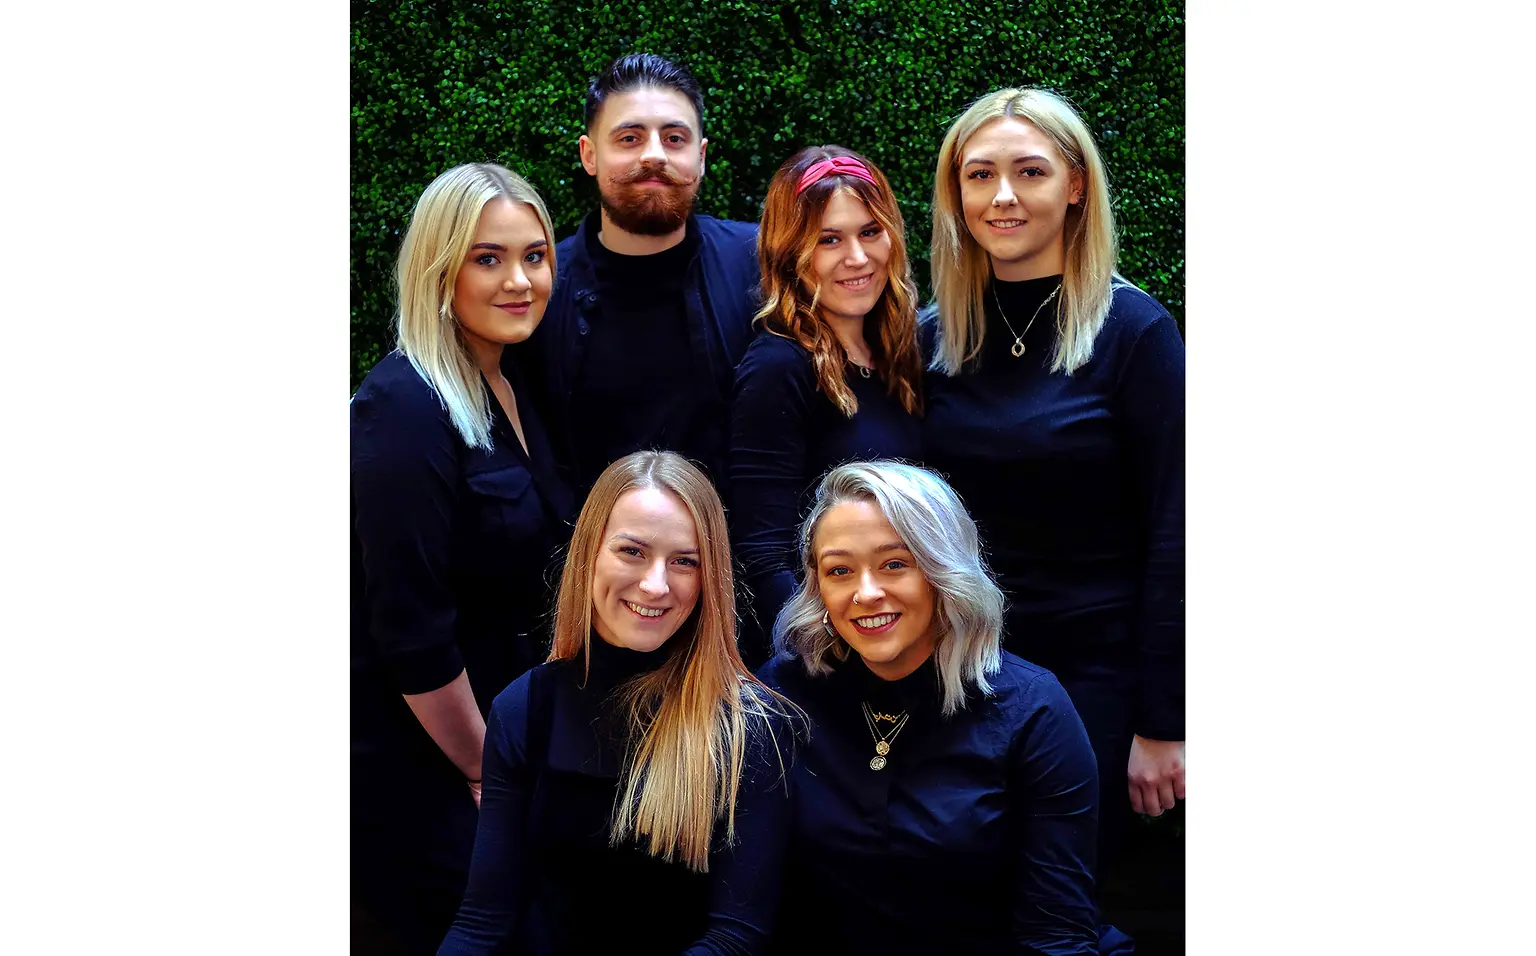 The 2019 Schwarzkopf Professional Young Artistic Team